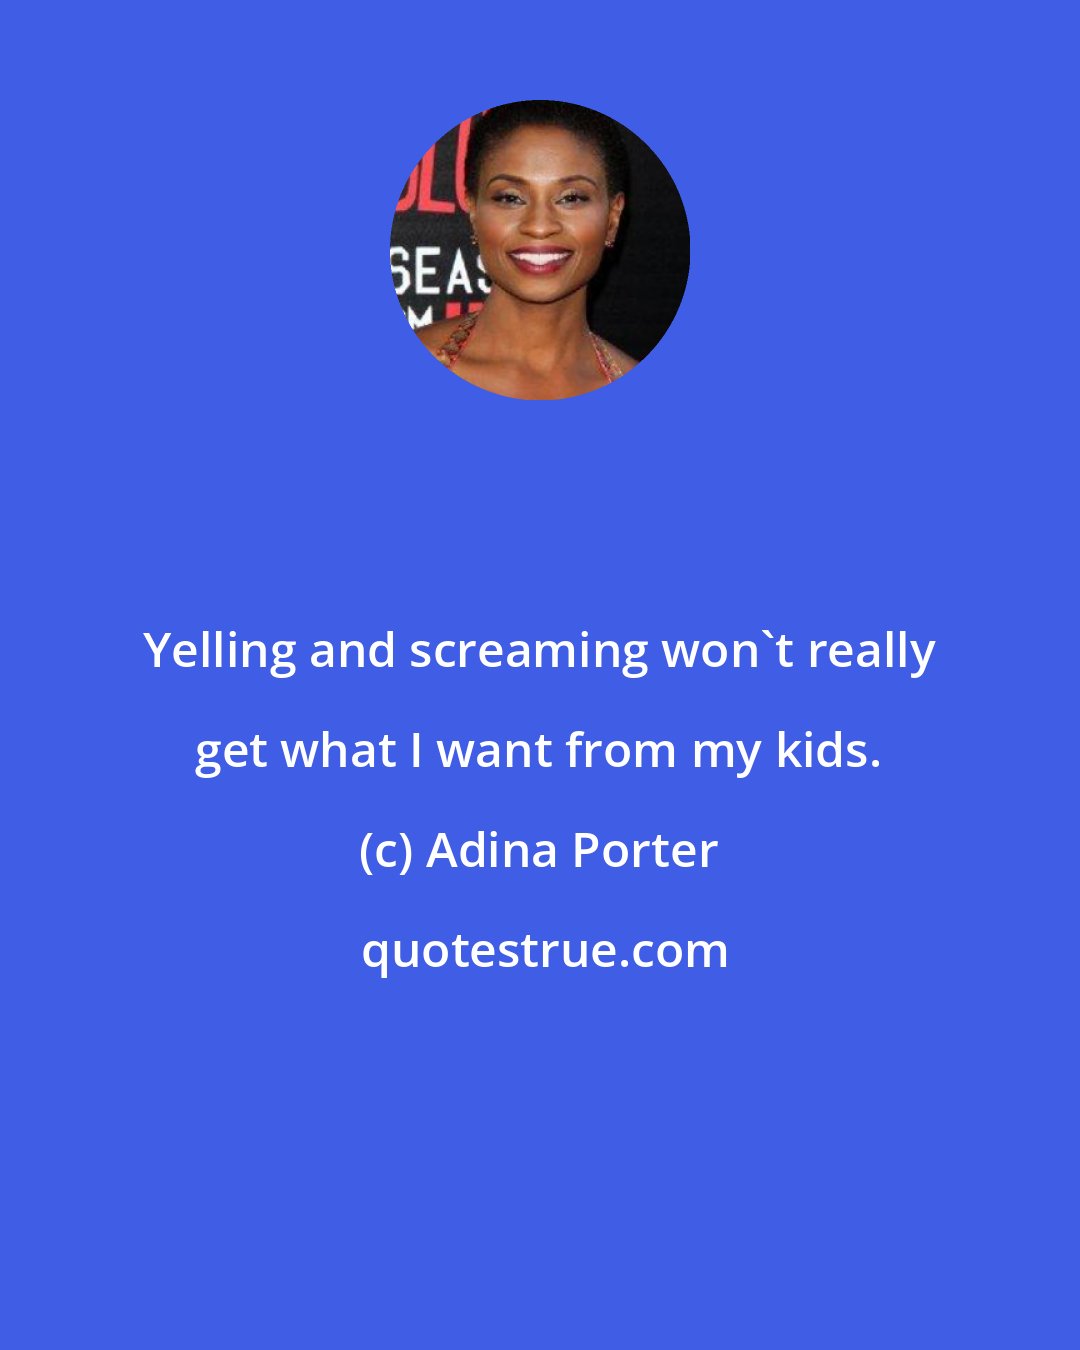 Adina Porter: Yelling and screaming won't really get what I want from my kids.